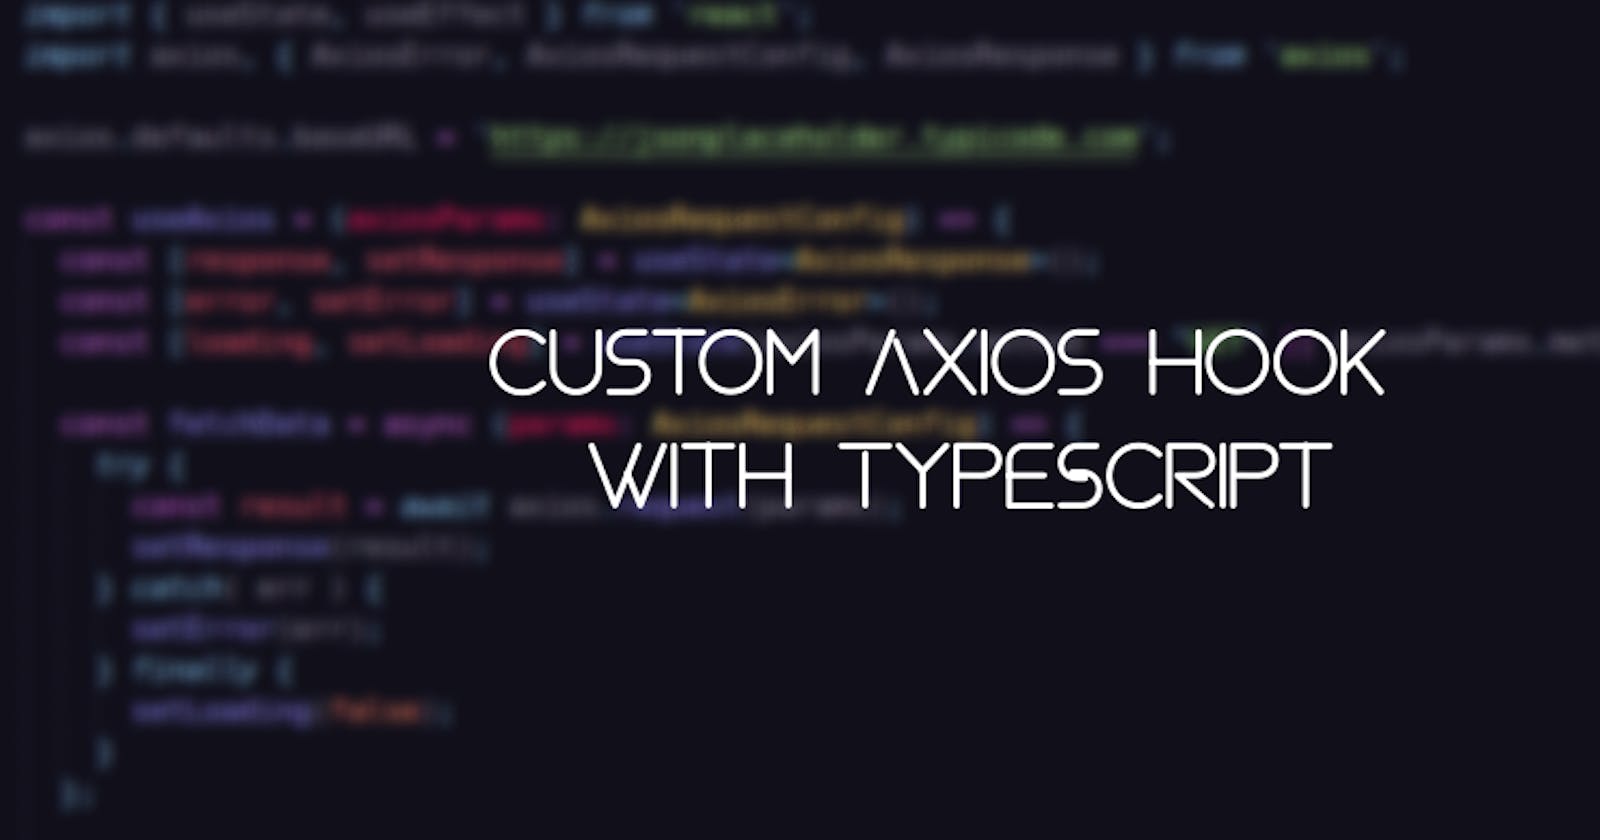 Writing a custom Axios hook in TypeScript for API calls in your React application